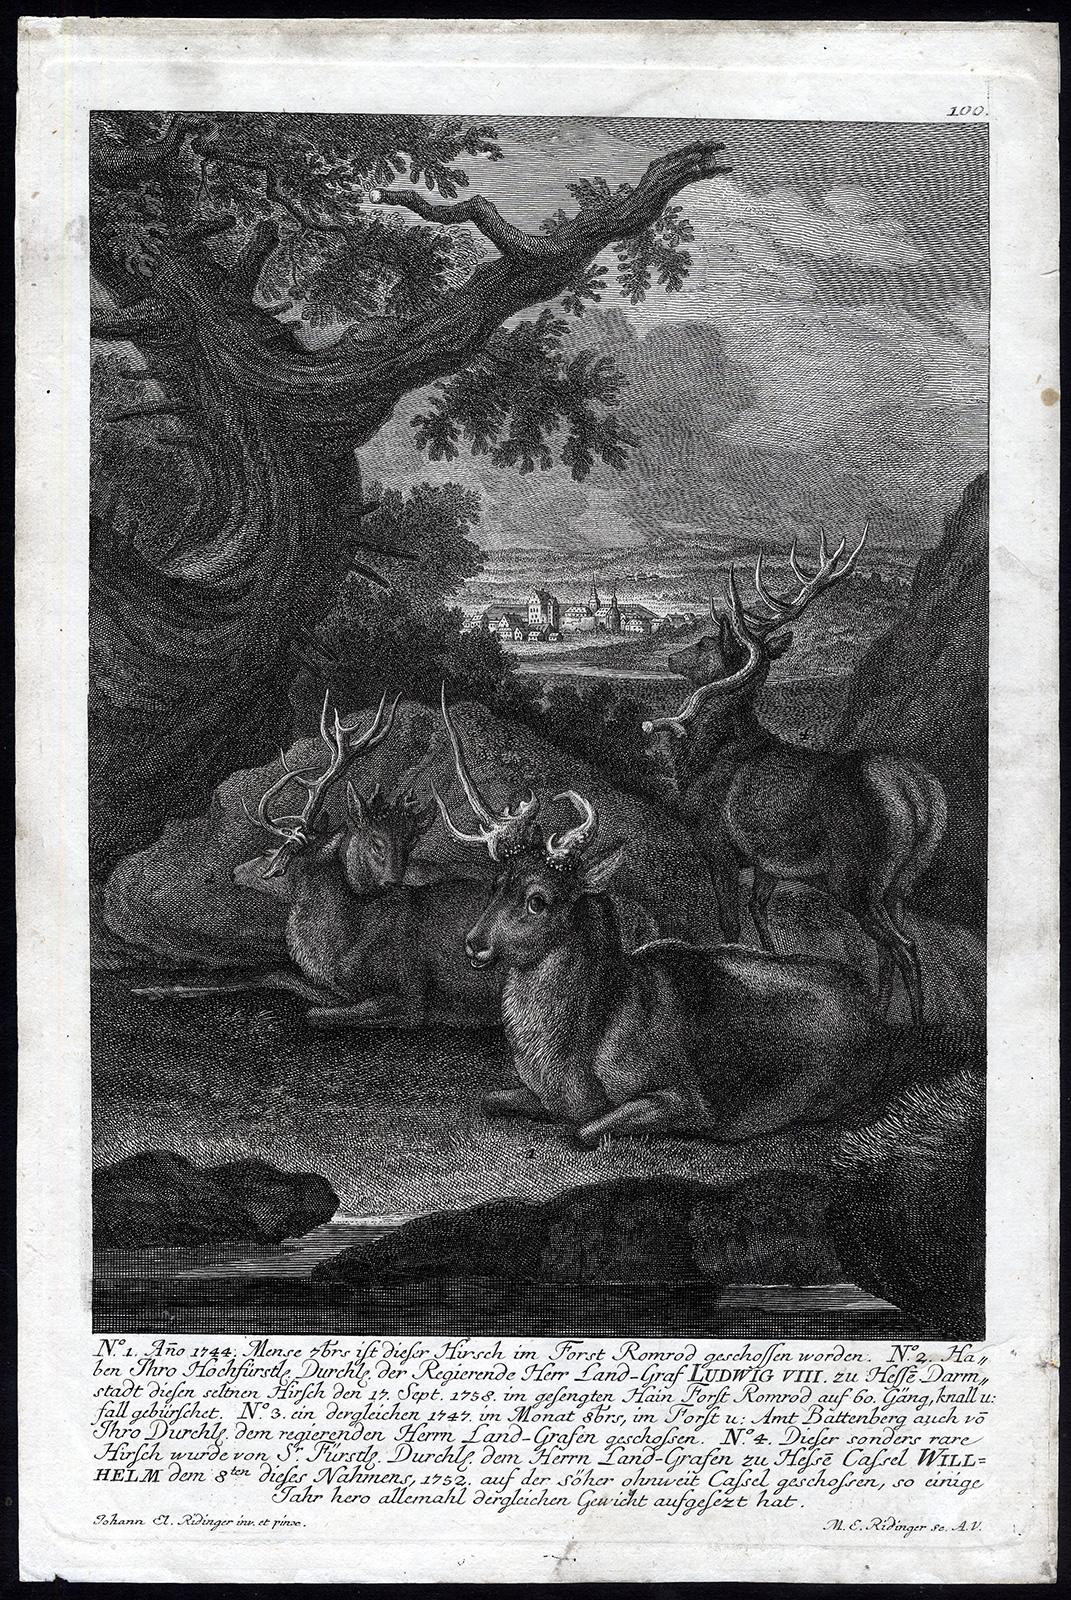 Antique hunting scene print in Romrod forest by Ridinger - Engraving - 18th c - Print by Martin Elias Ridinger